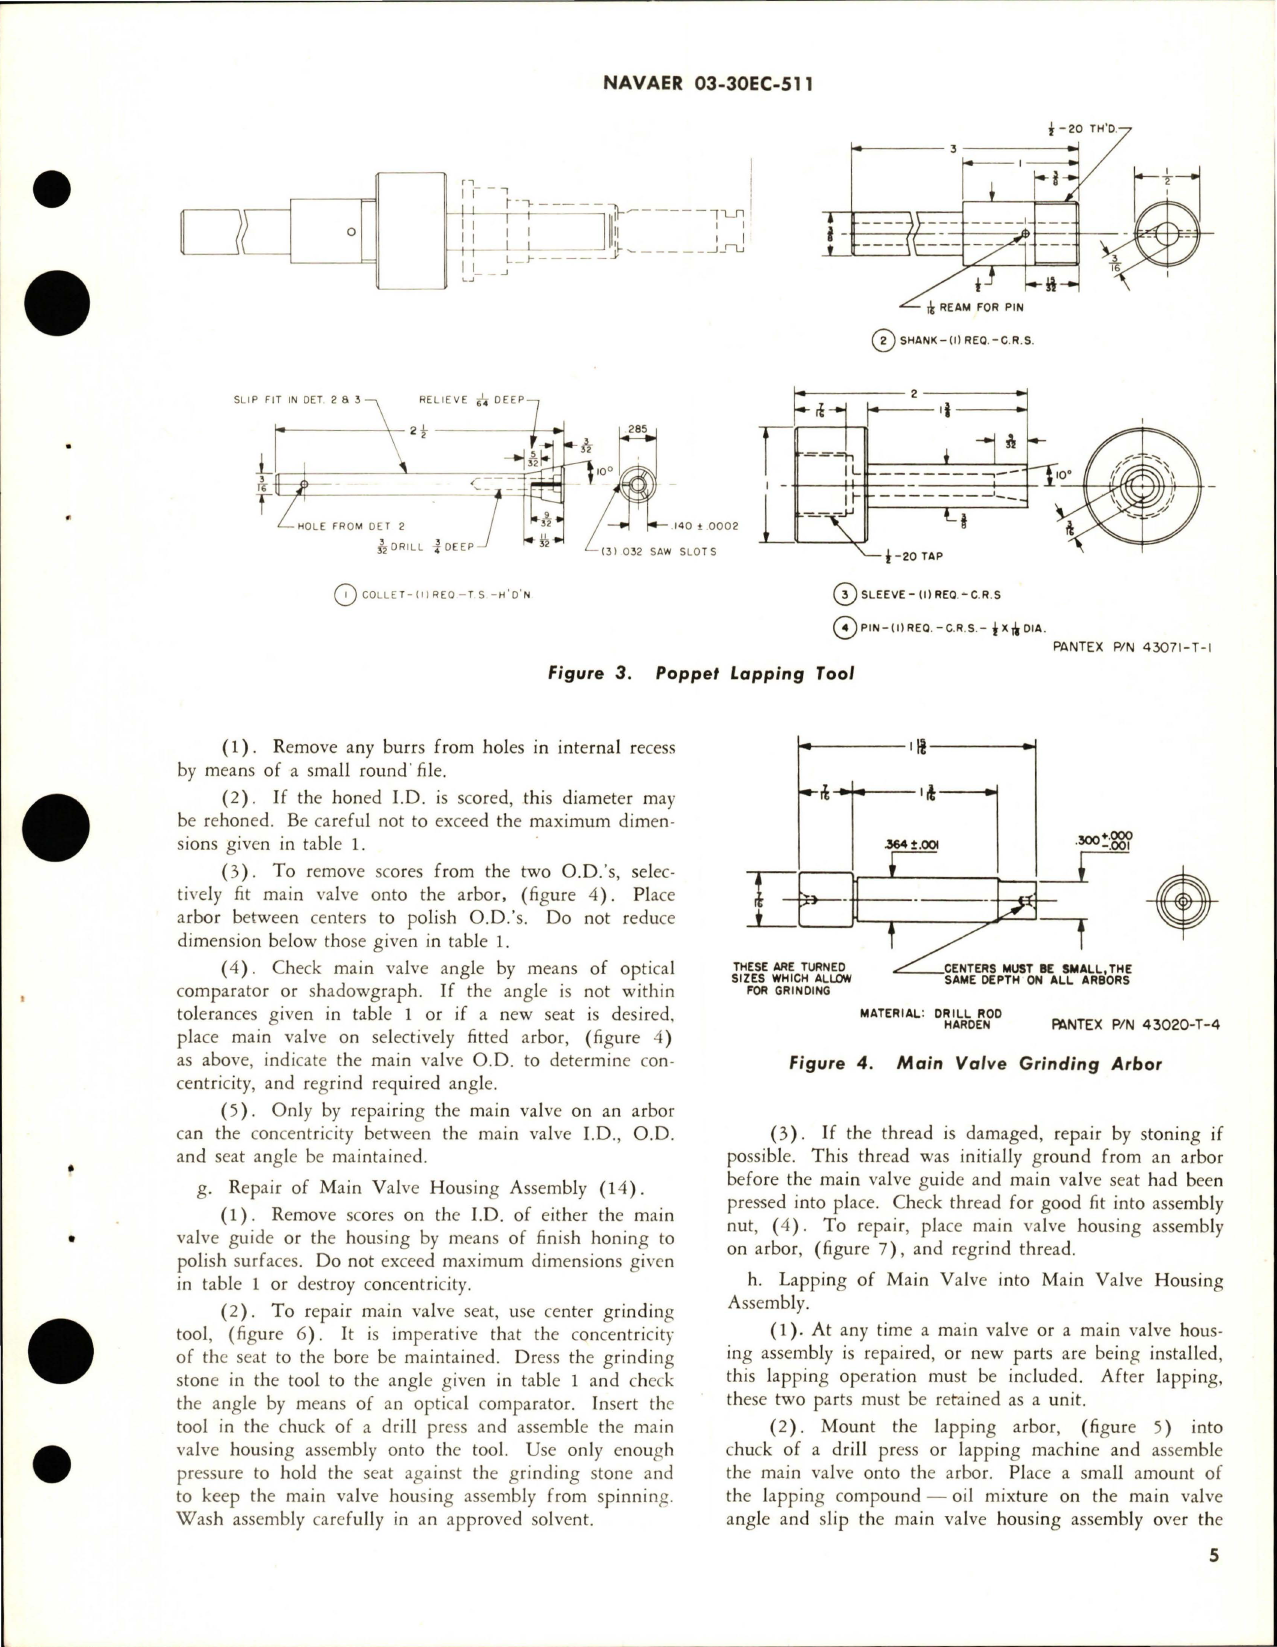 Sample page 5 from AirCorps Library document: Overhaul Instructions with Parts Breakdown for Hydraulic Pressure Relief Valve - AA-8-08 and AA-12-10A 